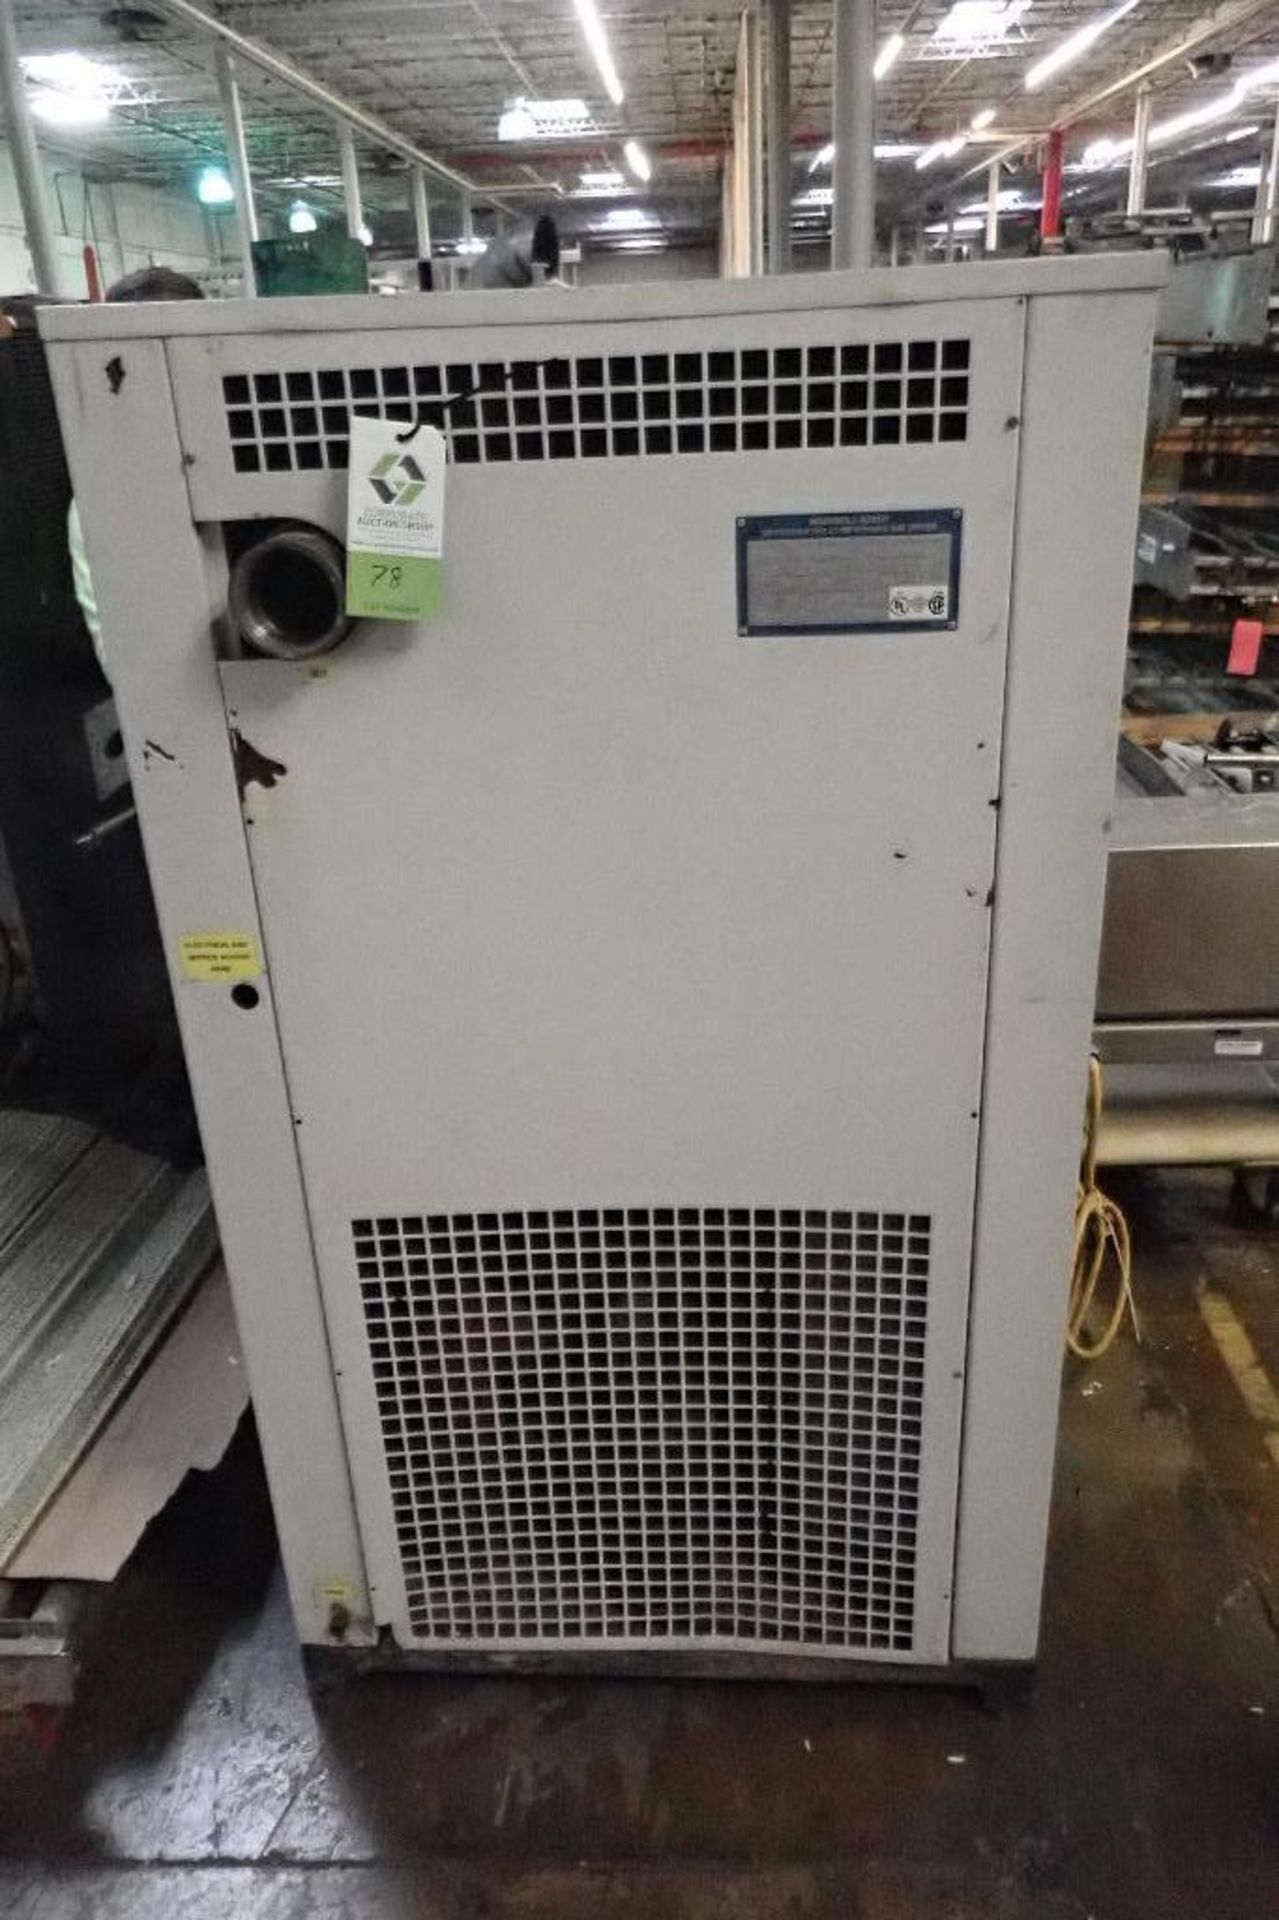 1994 Ingersoll-Rand refrigerated compressed air dryer, Model DZR550E4, SN 942DZR5519 (bad compressor